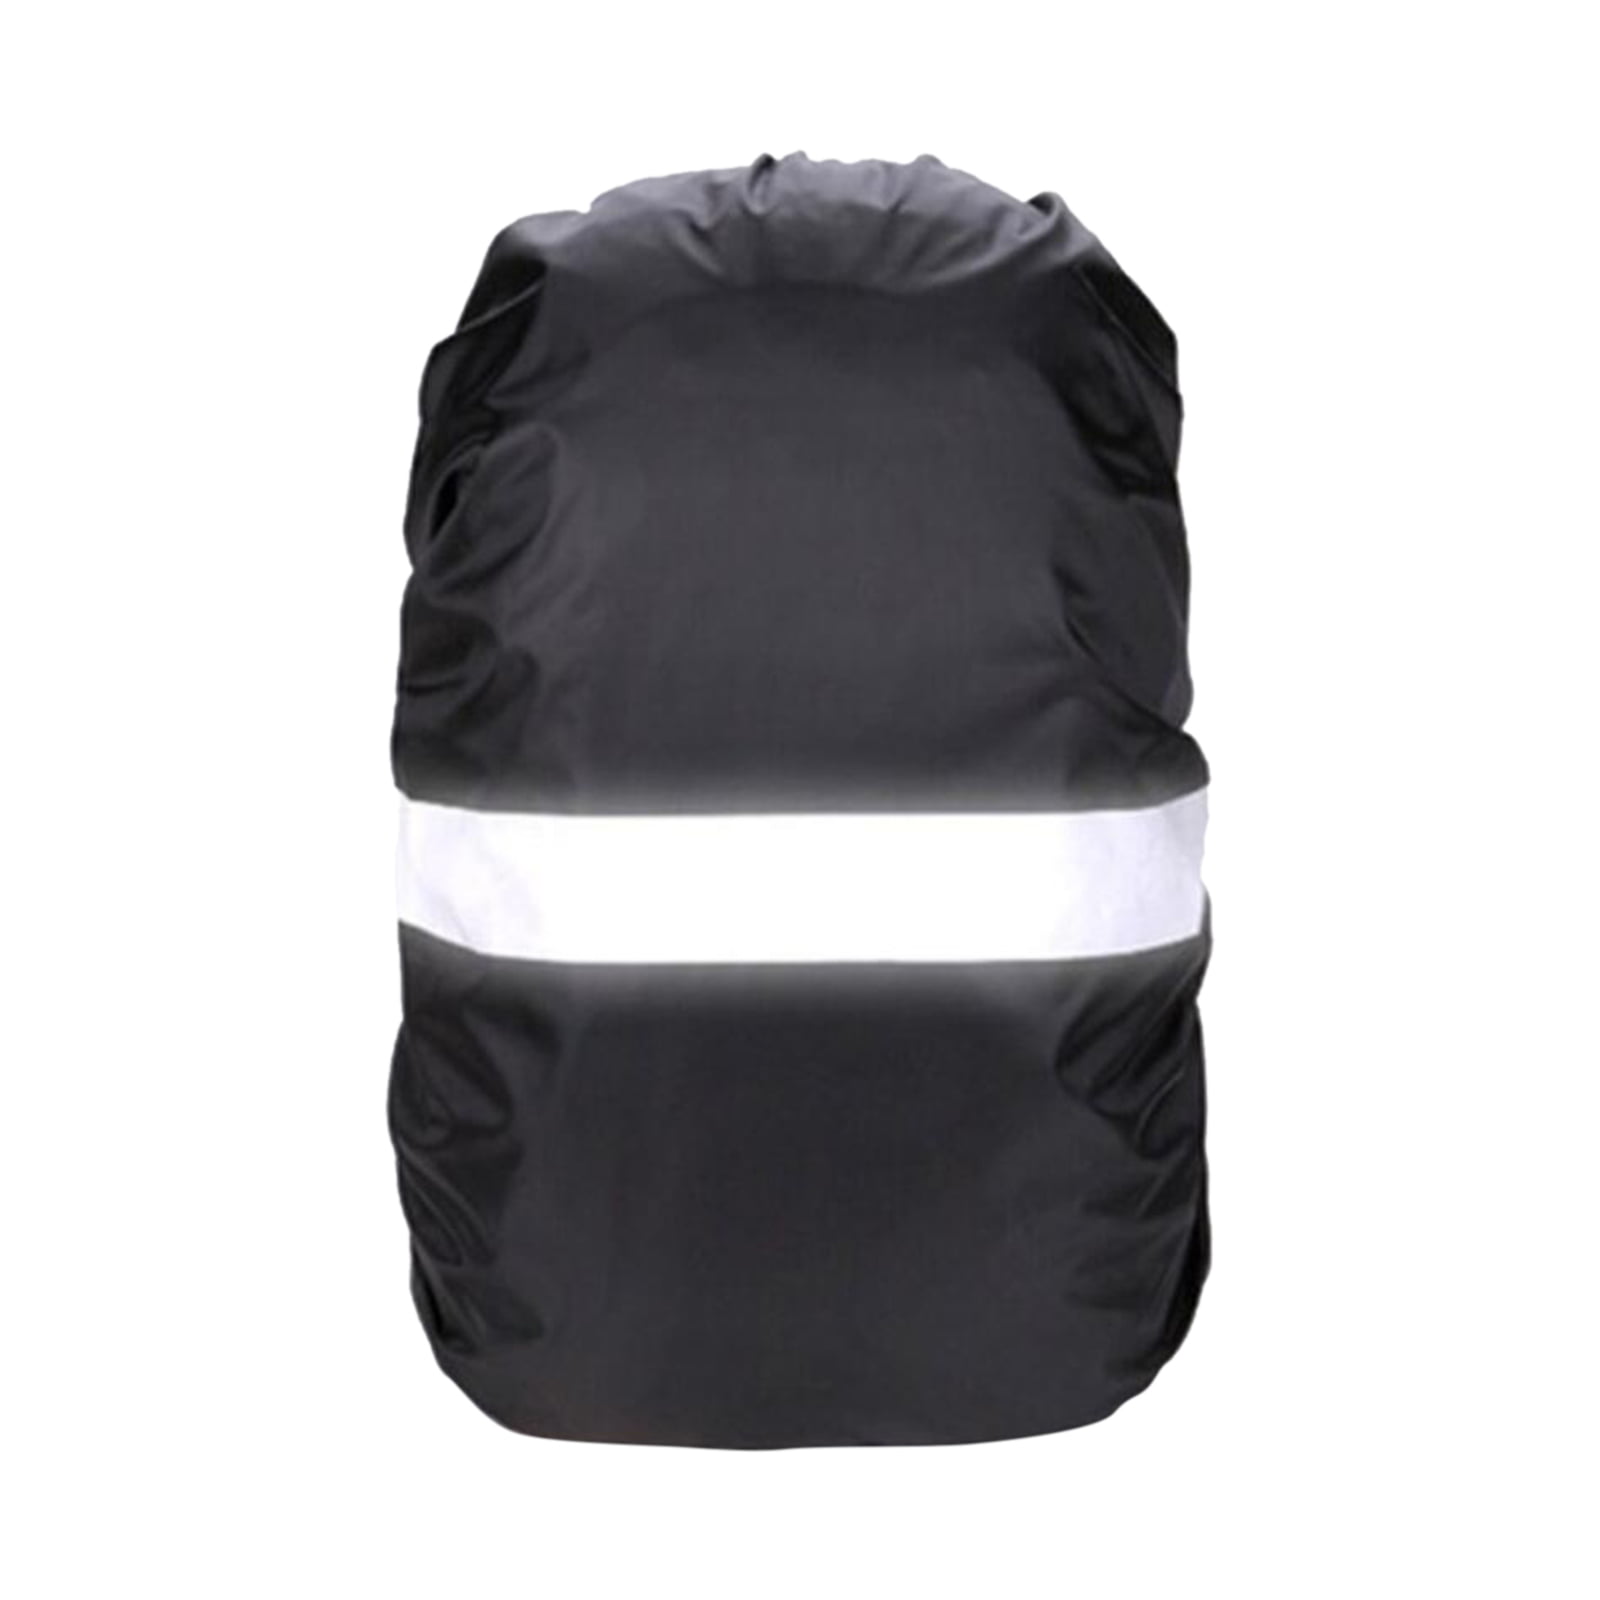 Waterproof Travel Hiking Accessory Backpack Camping Dust Rain Cover 35l K2z3 for sale online 